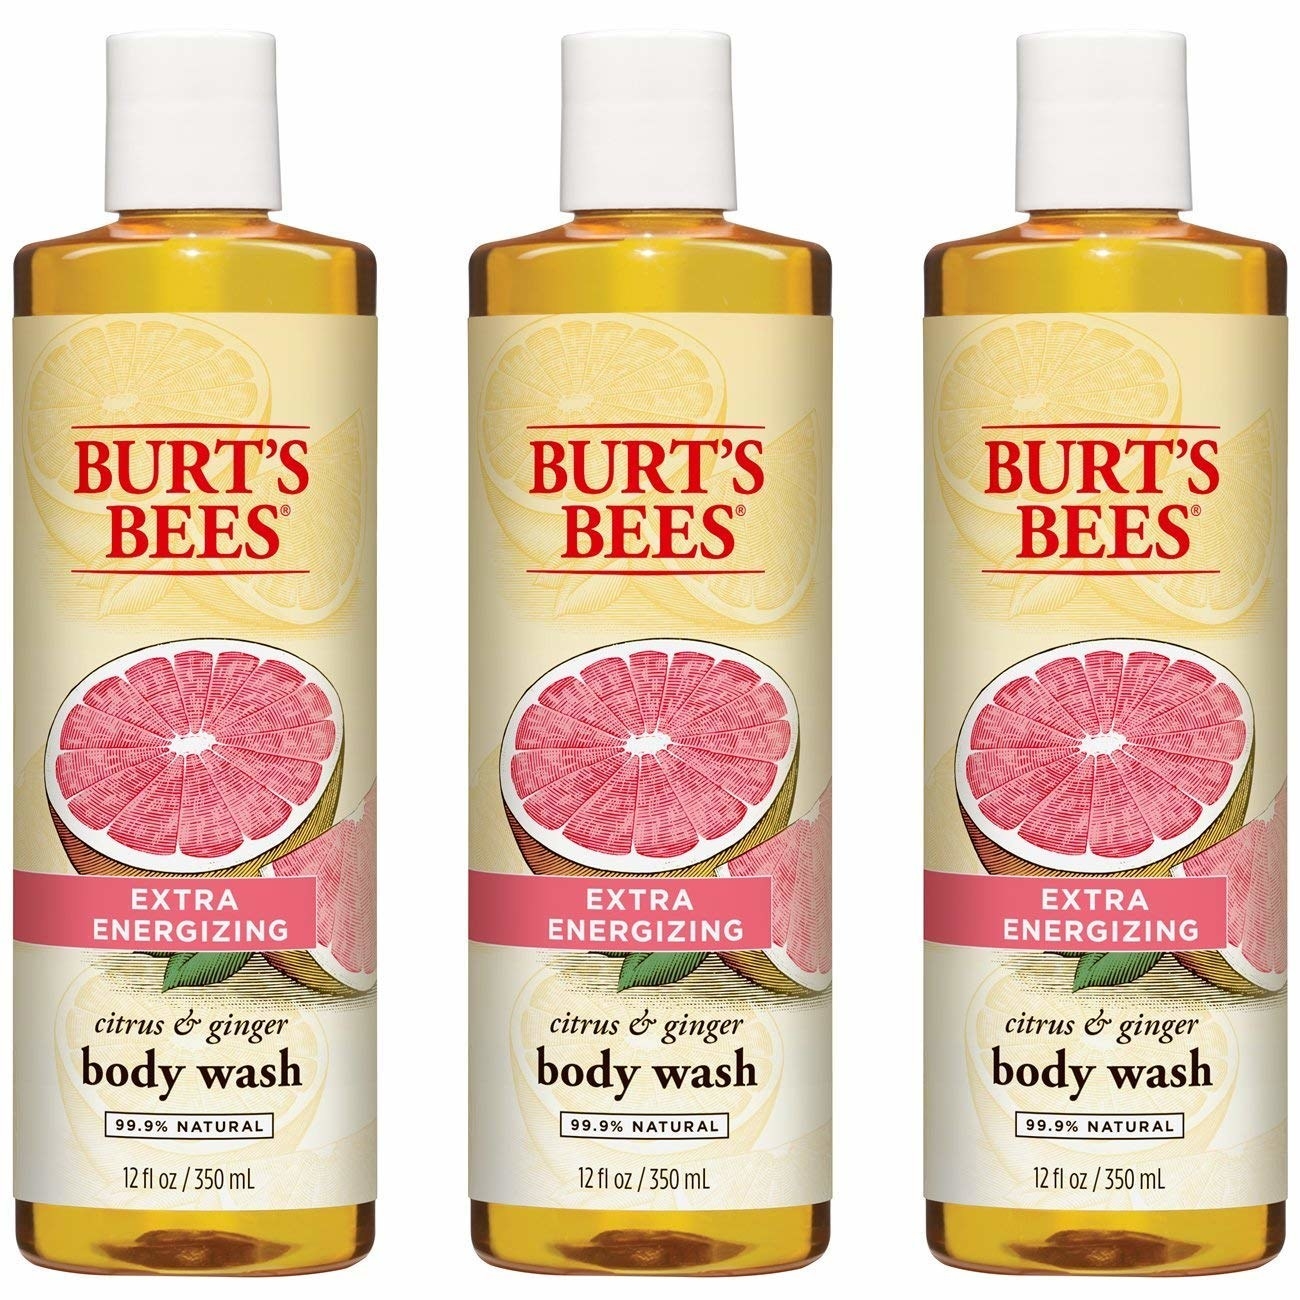 The bottles of body wash